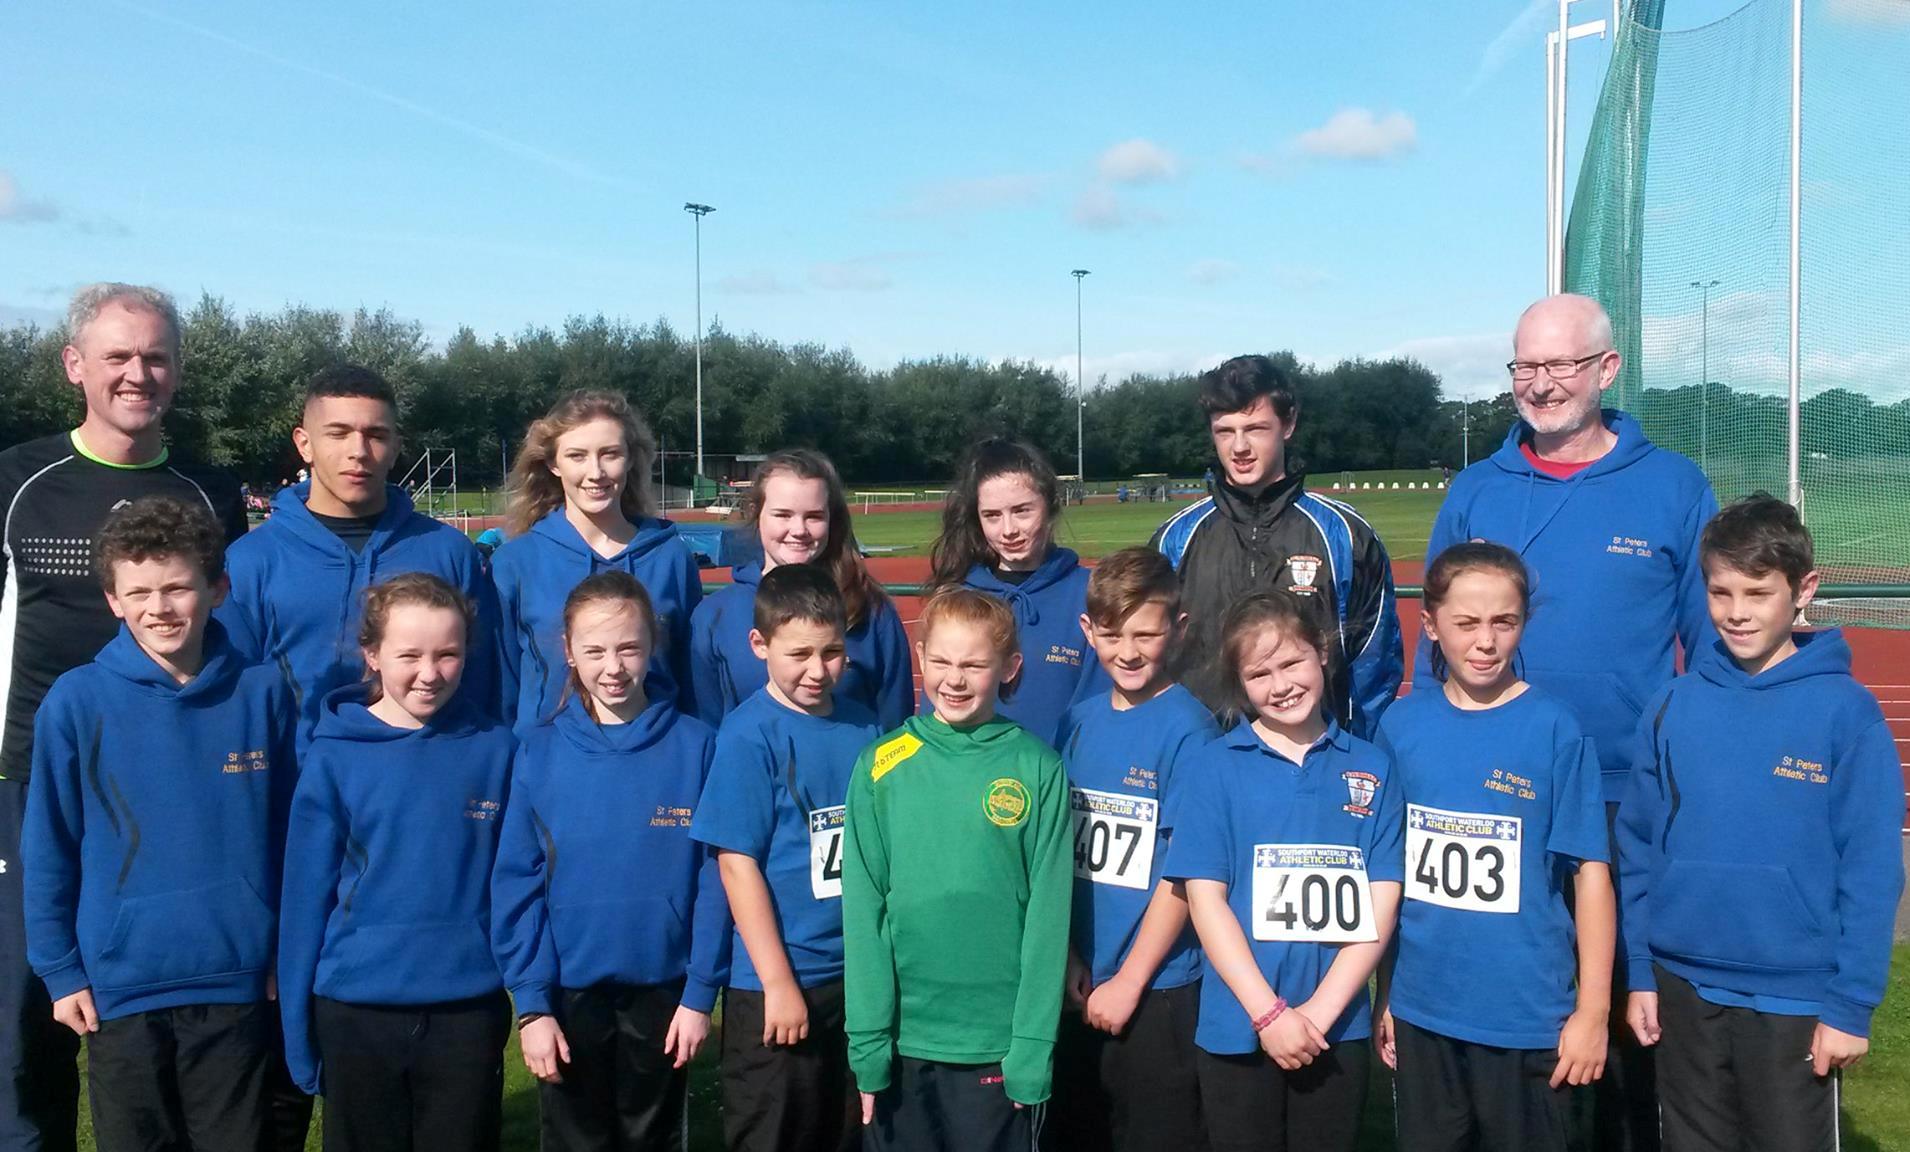 County Louth athletes at Southport Waterloo AC Open Meet (Liverpool, September 2015)